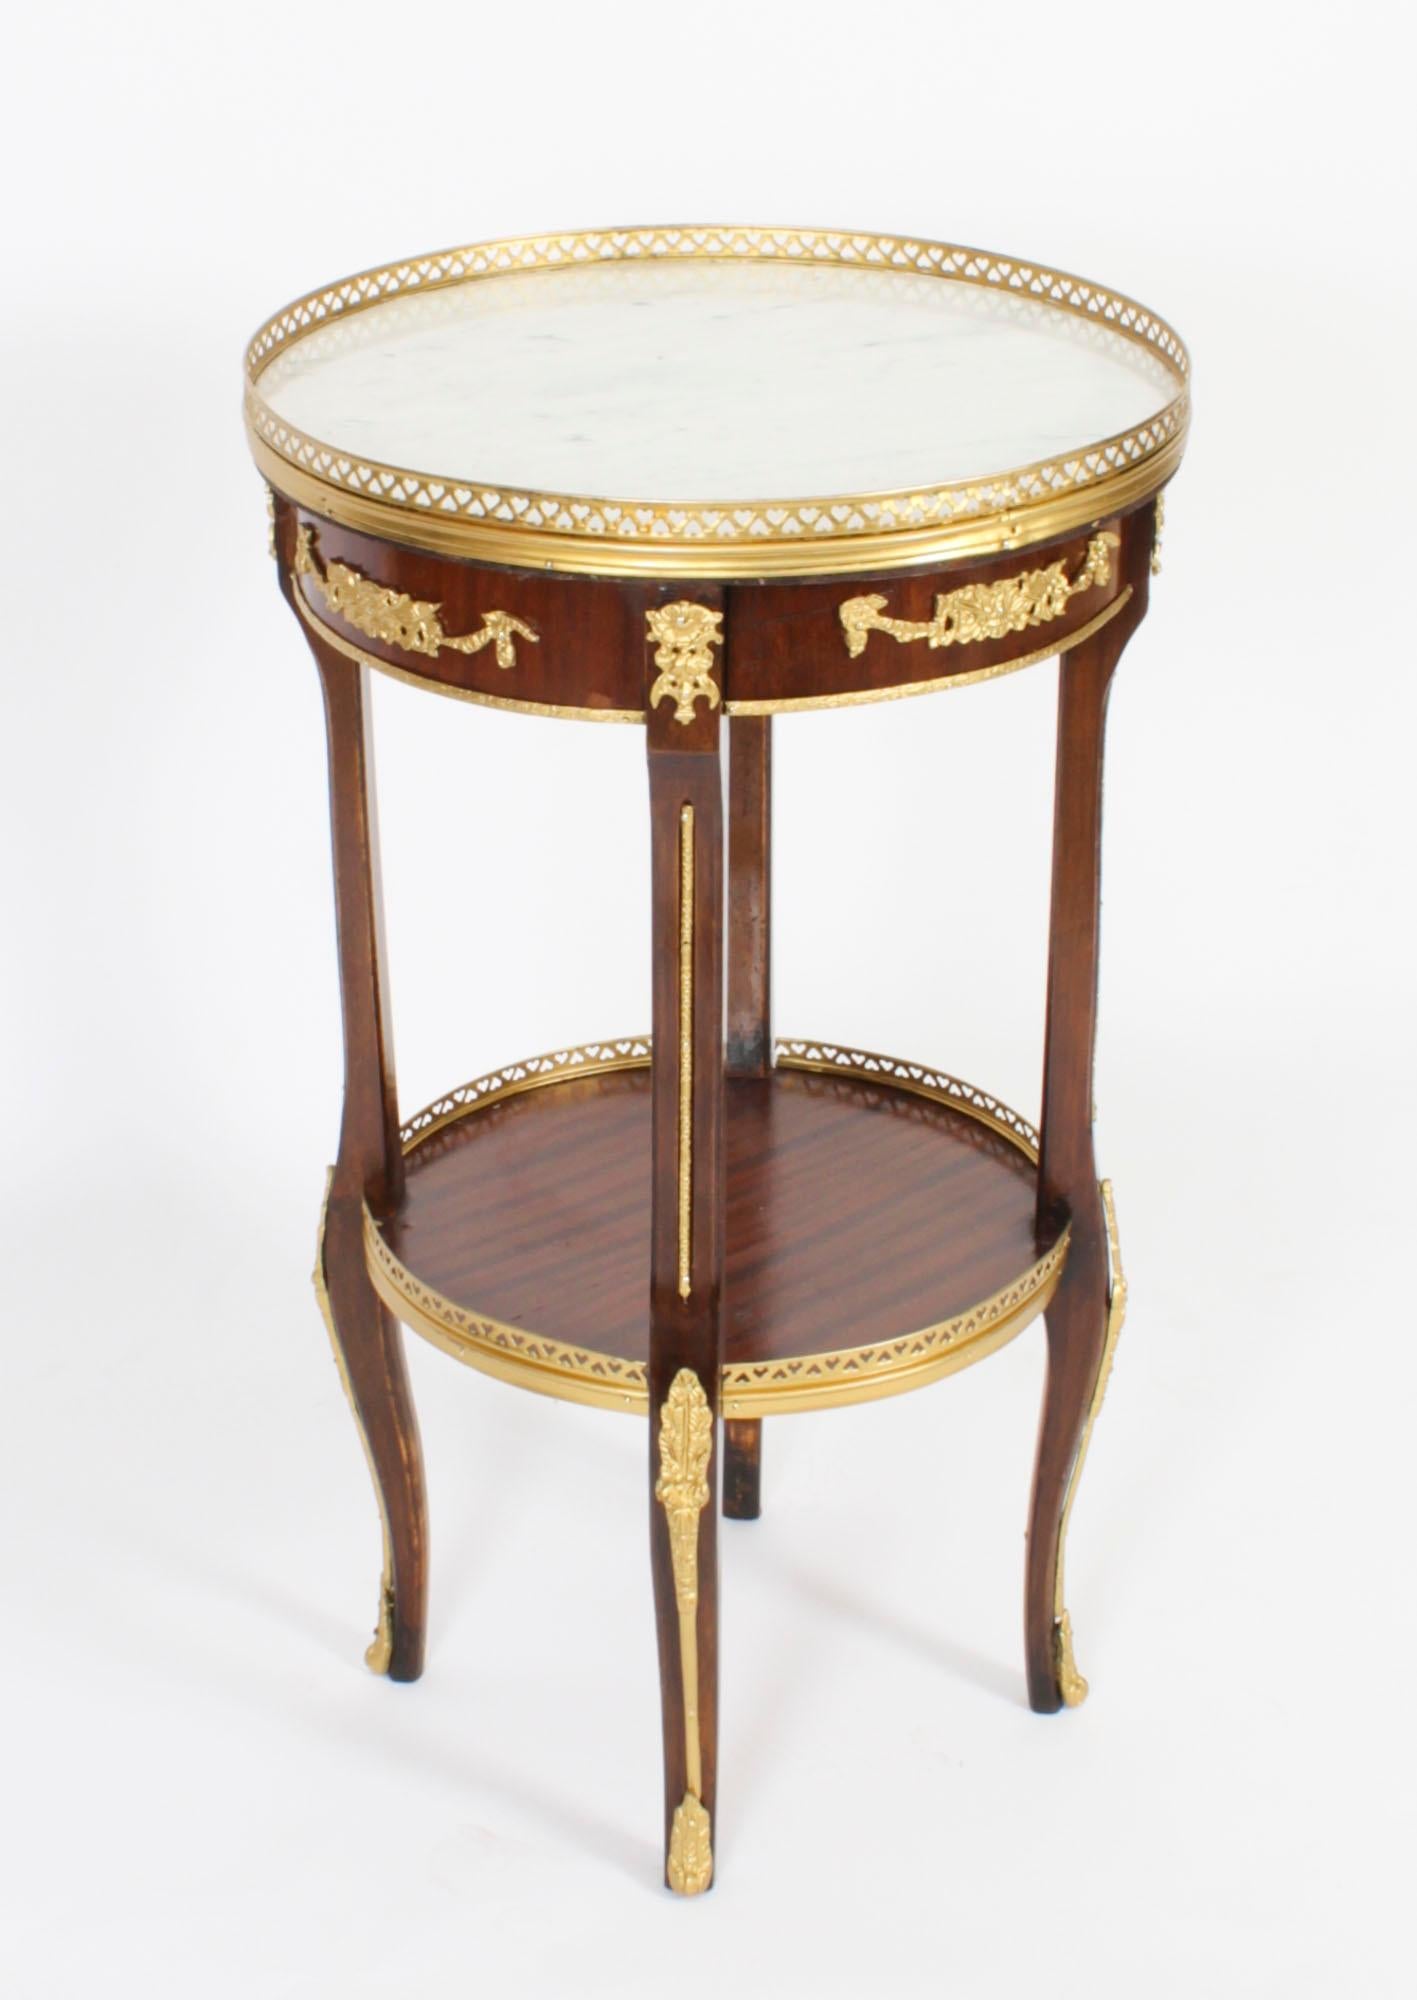 Antique French Empire Marble & Ormolu Occasional Table, 19th Century For Sale 13